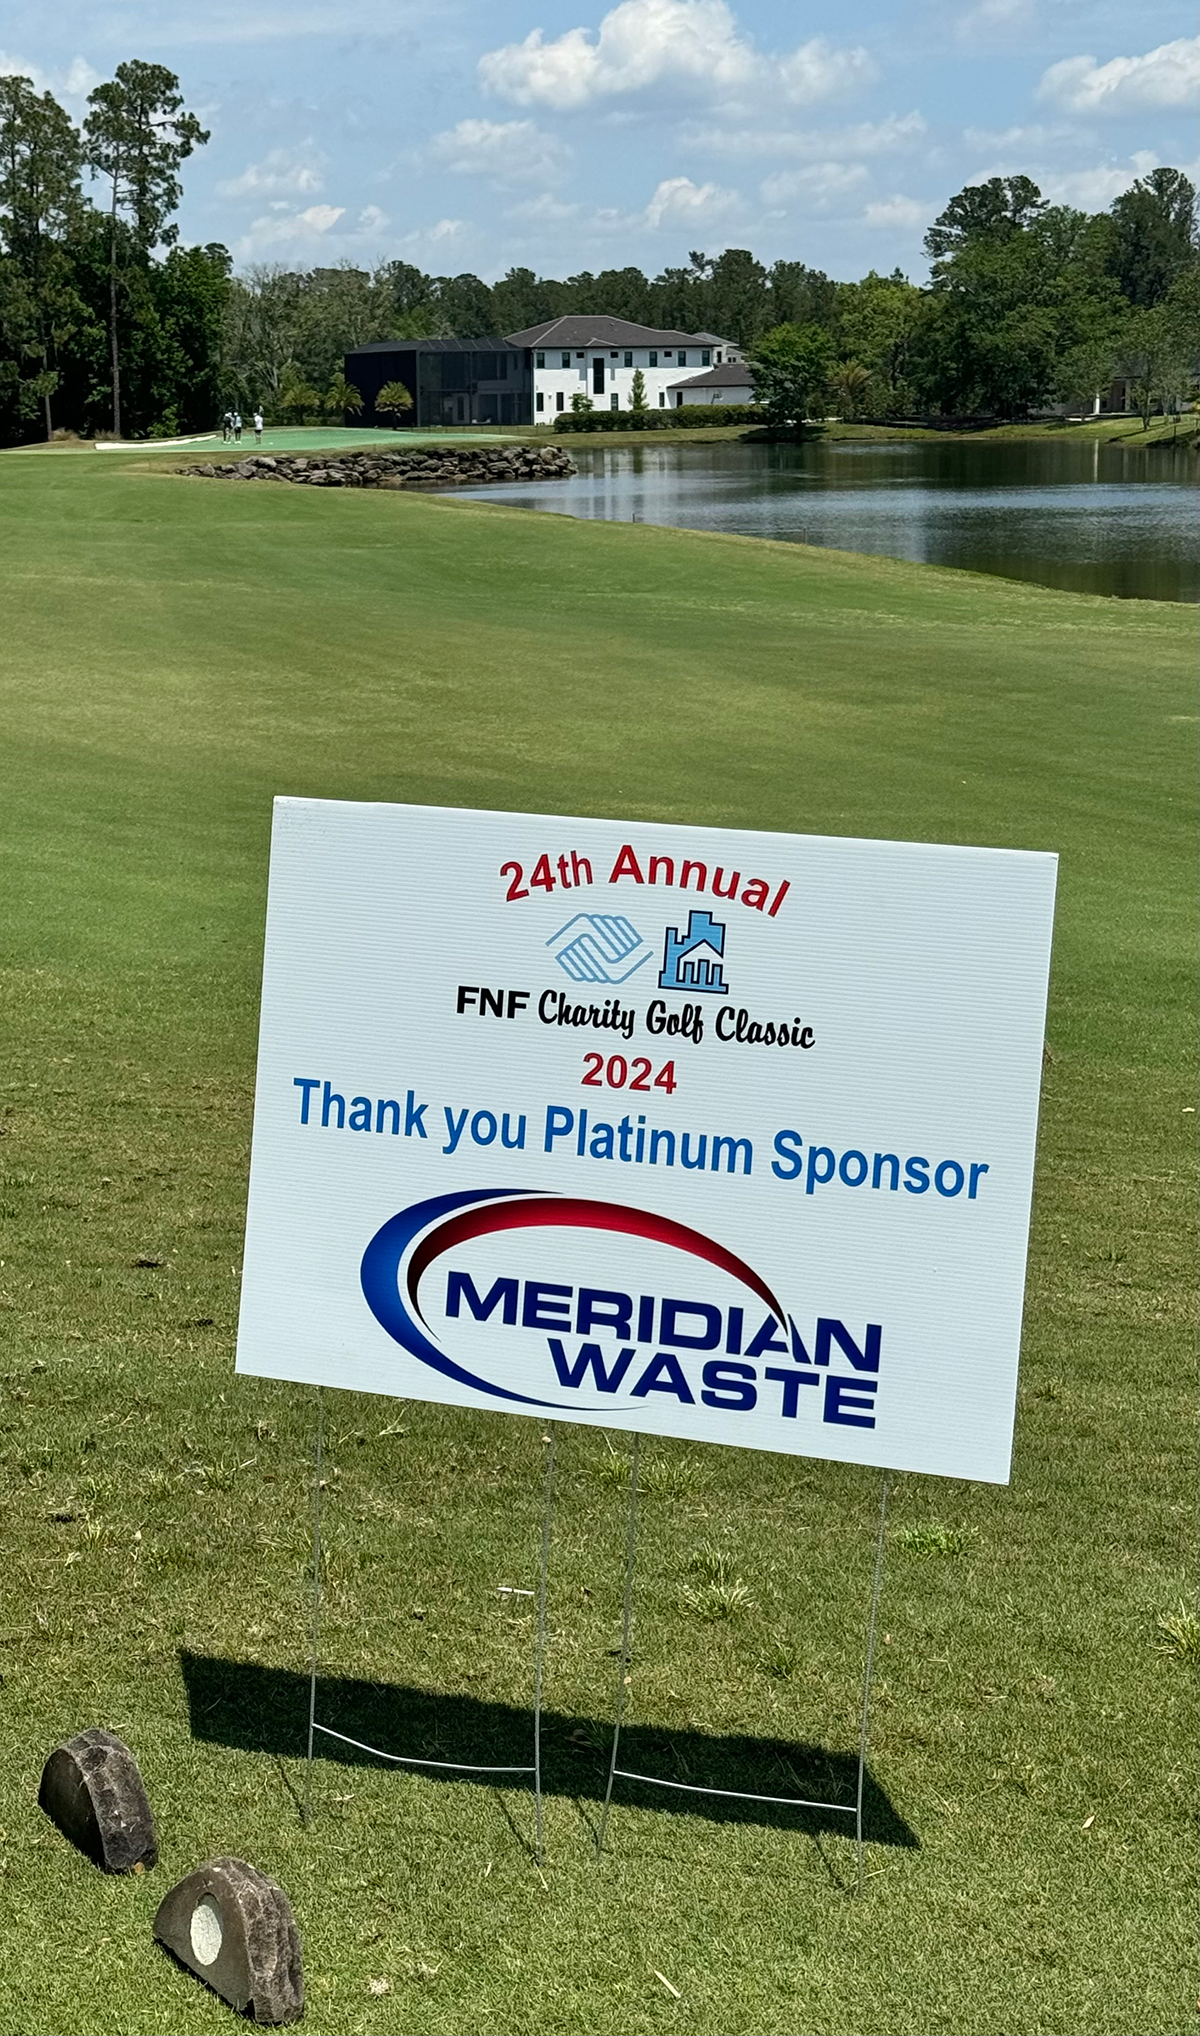 Meridian Waste Florida was the Platinum Sponsor of the 2024 Northeast Florida Boys & Girls Club’s FNF Charity Golf Classic